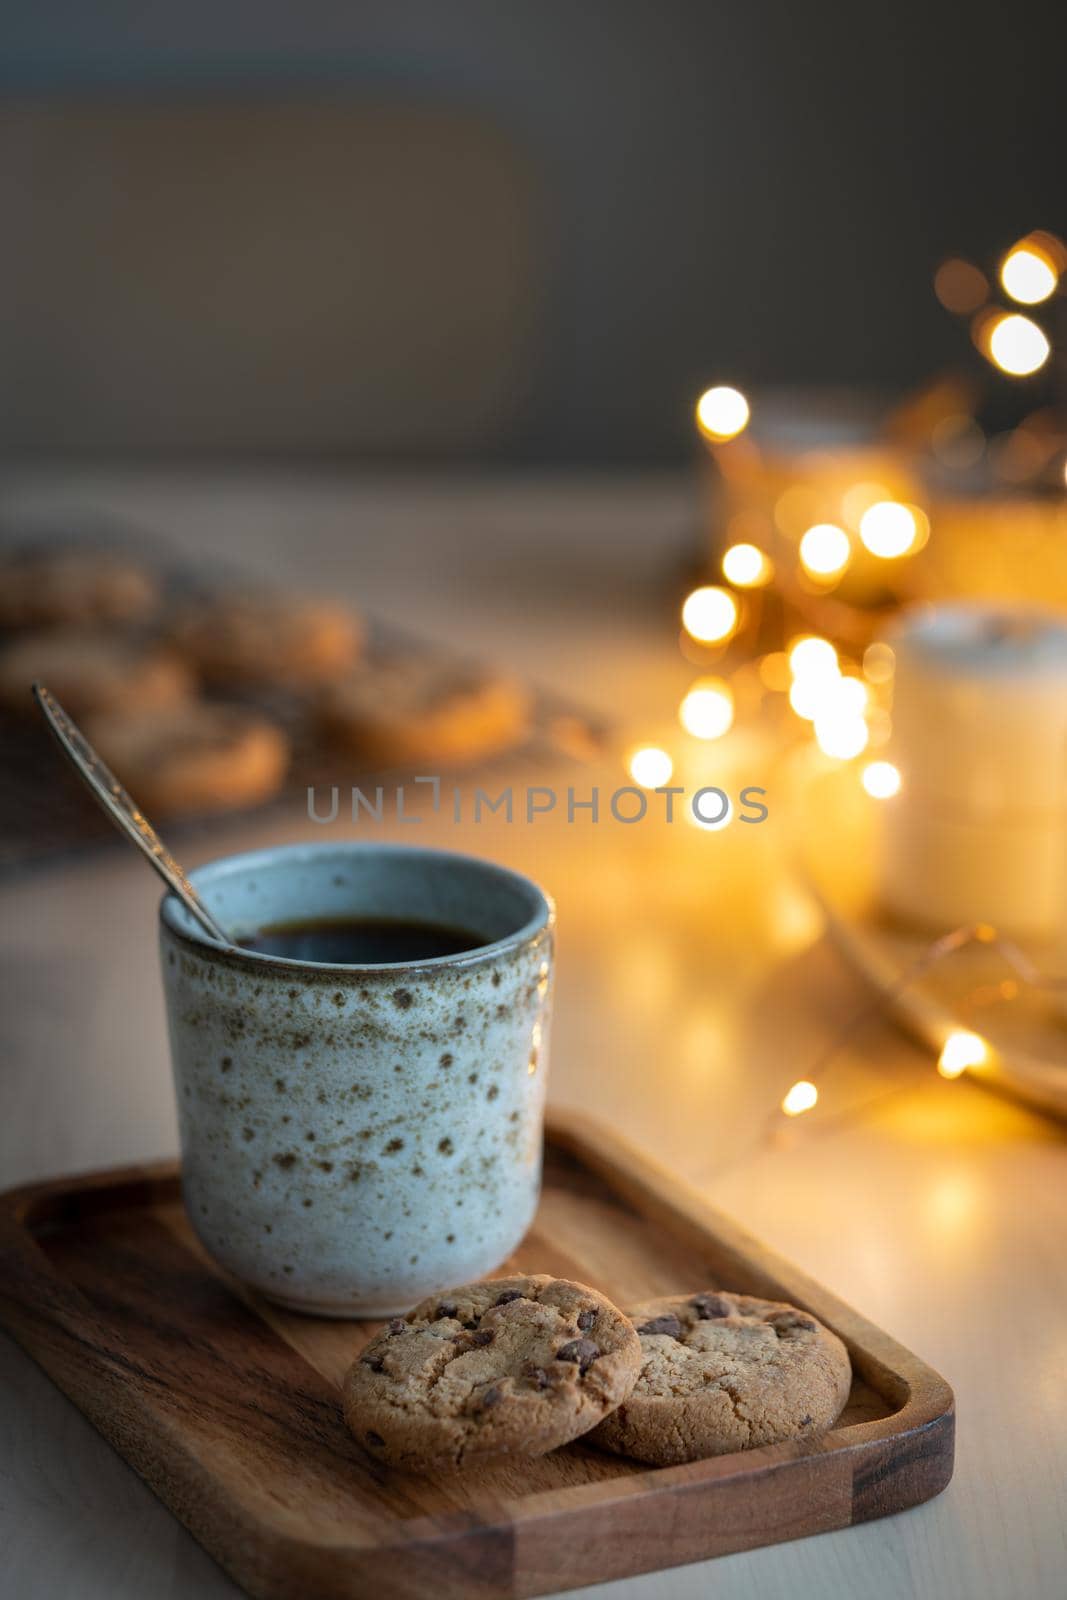 Cozy evening, mug of drink, holiday decorations, candles and lights garlands. Christmas background with Chocolate chip cookies, cup of tea. Still life vertical photo